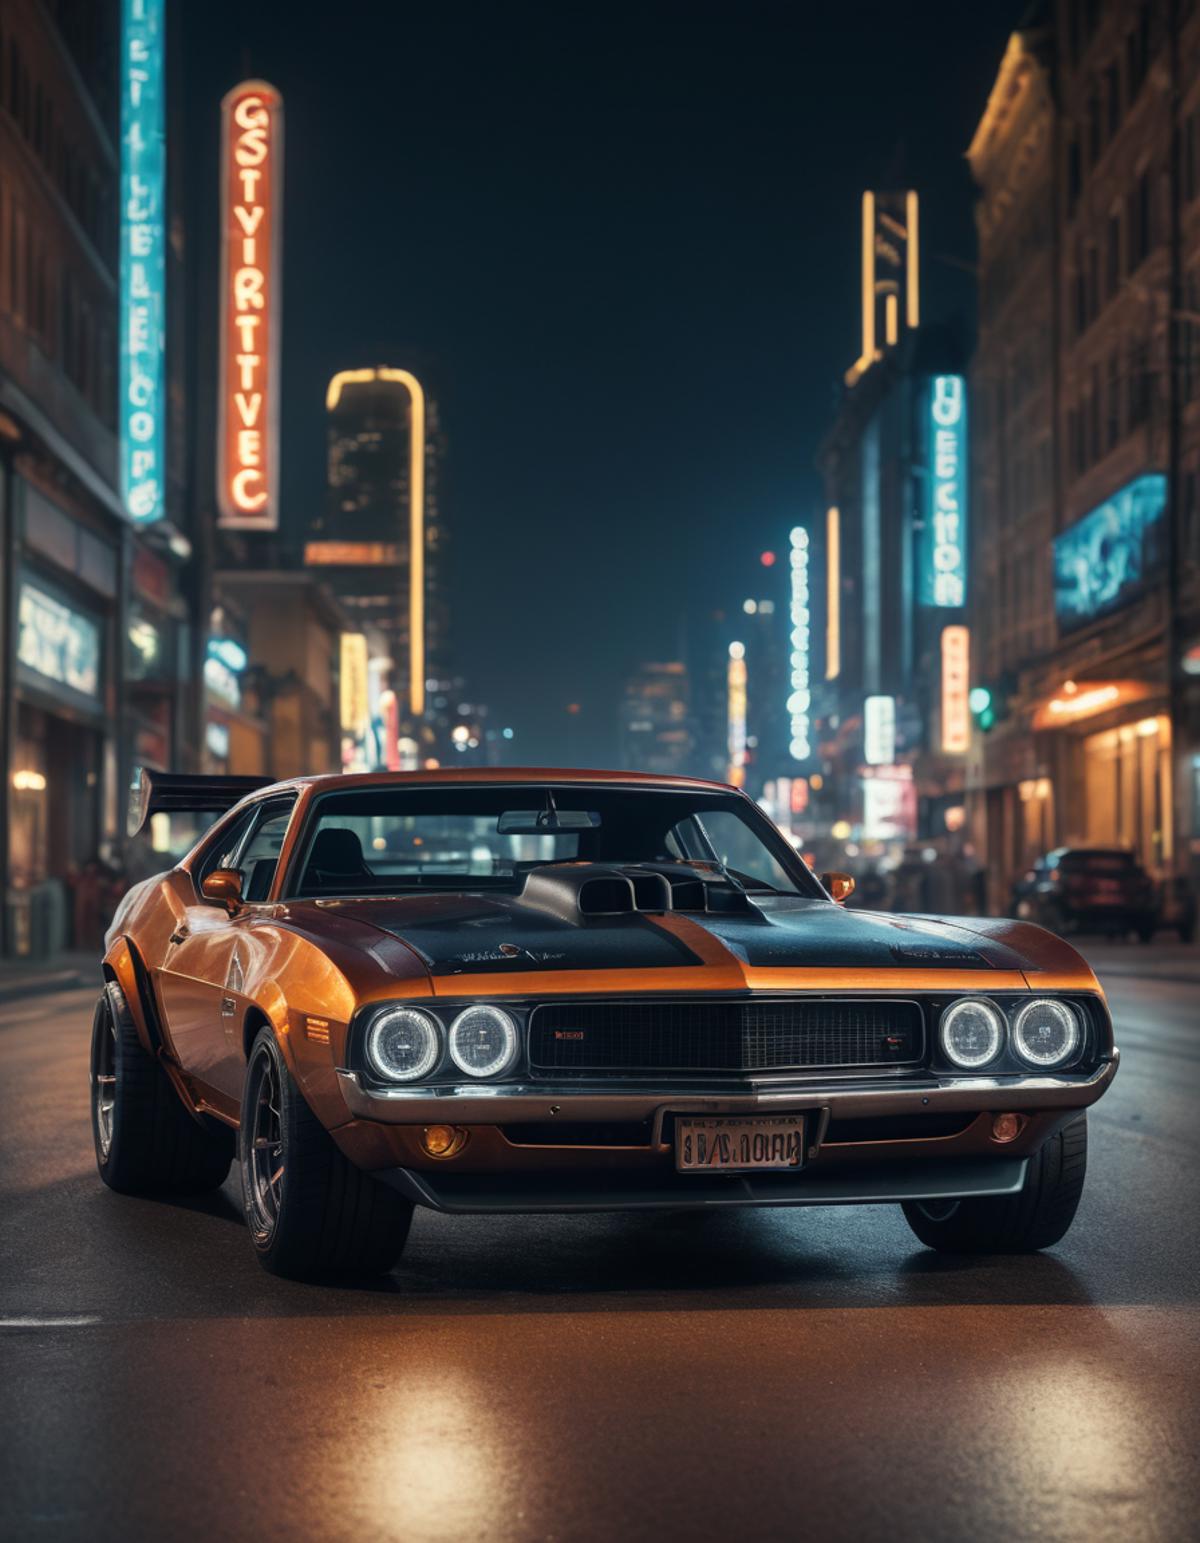 A classic muscle car sits on a city street at night.